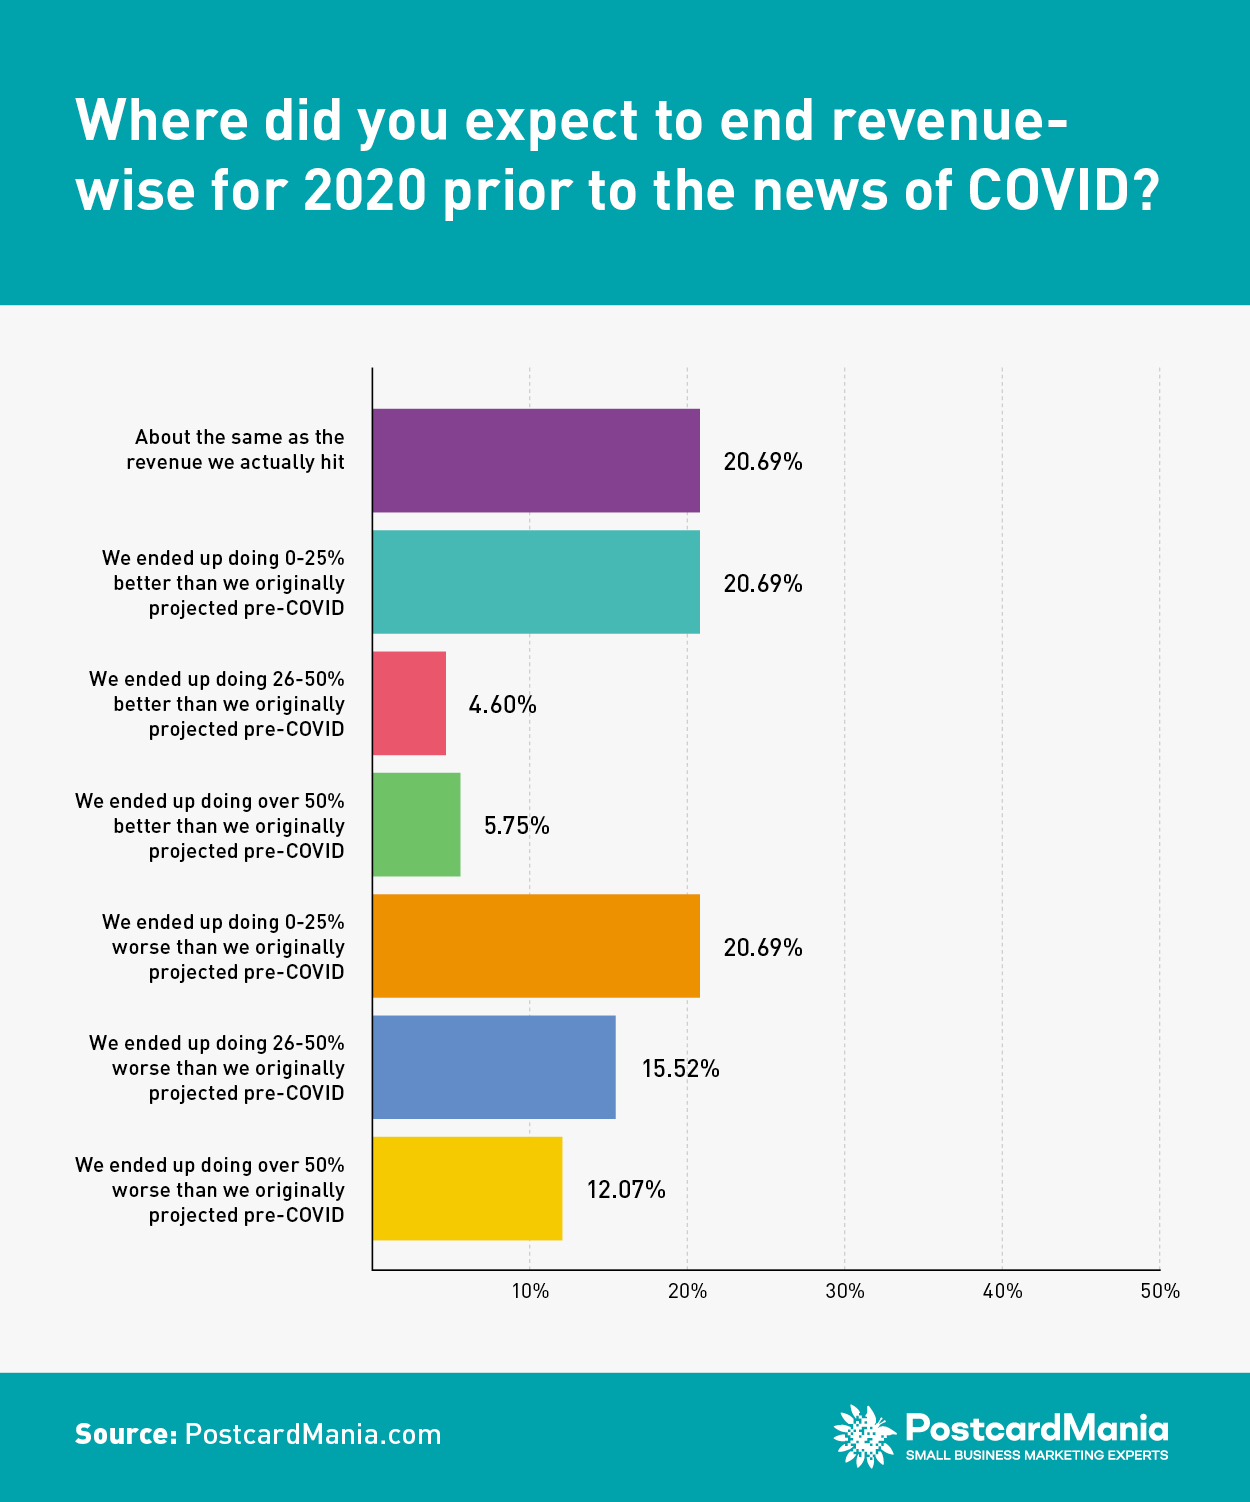 COVID Survey 13 - Where did you expect to end revenue-wise for 2020 prior to the news of COVID?